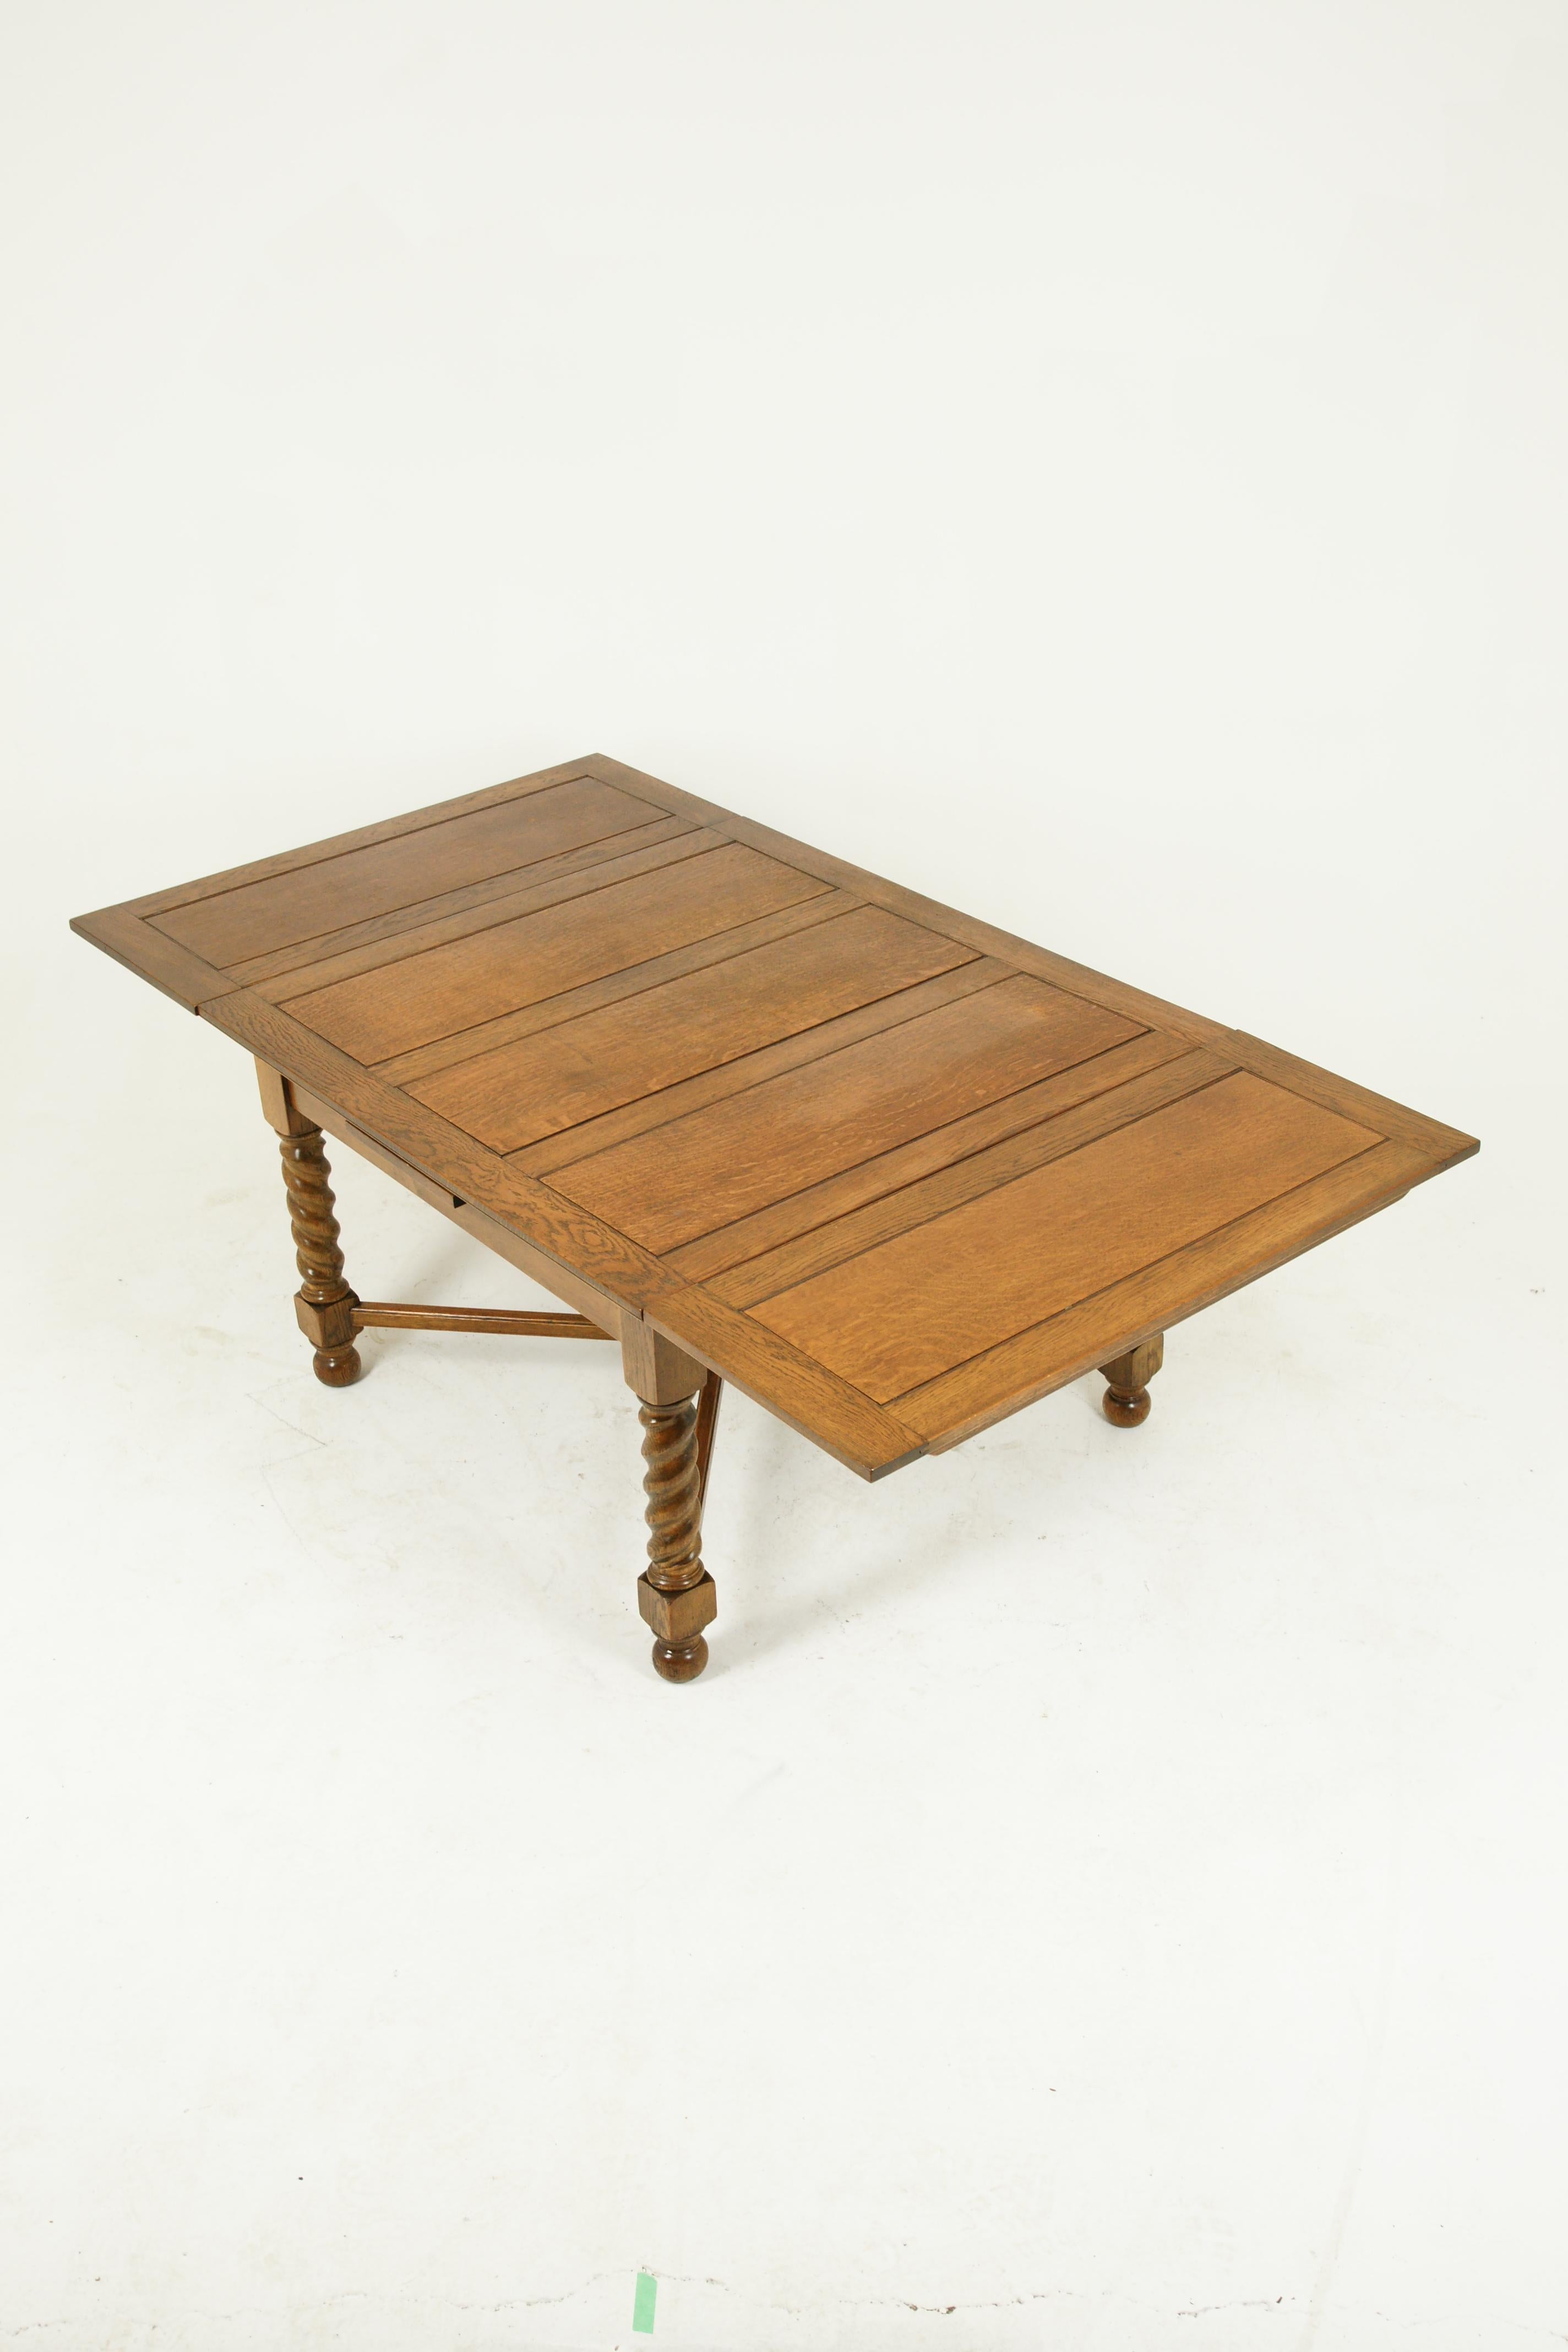 Hand-Crafted Antique Refectory Table, Antique Dining Table, Draw Leaf Table, 1920